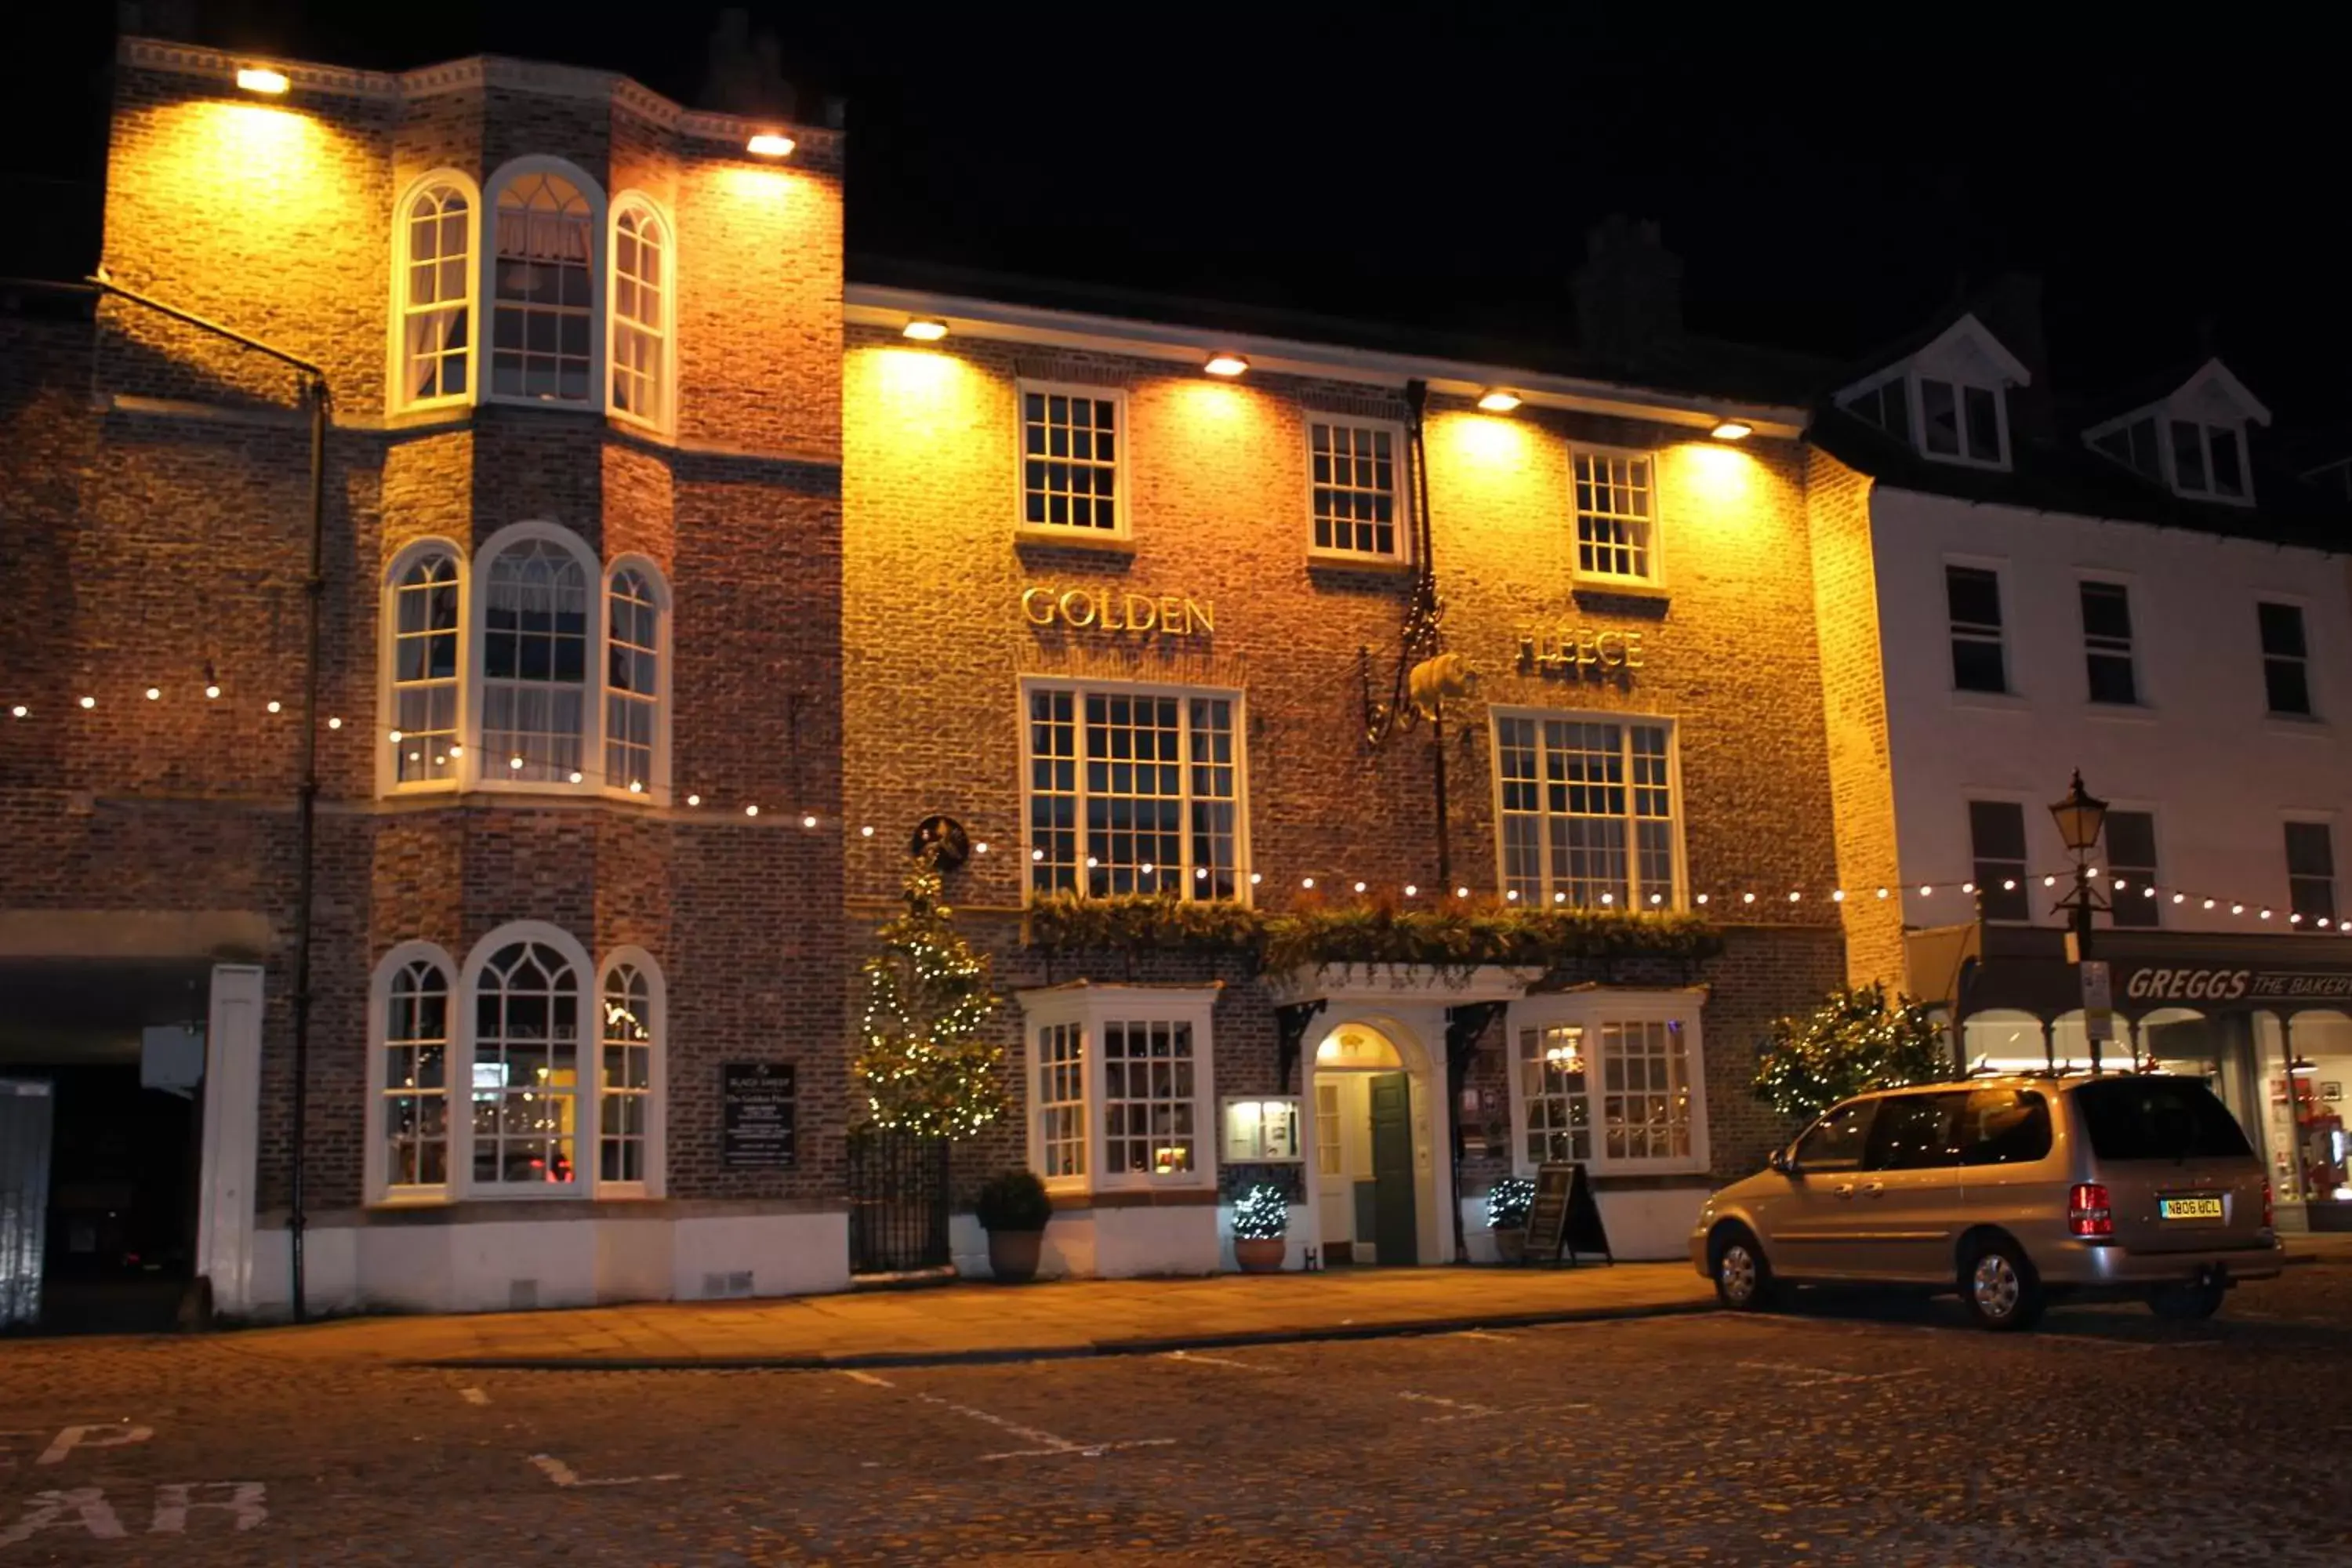 Facade/entrance, Property Building in The Golden Fleece Hotel, Thirsk, North Yorkshire